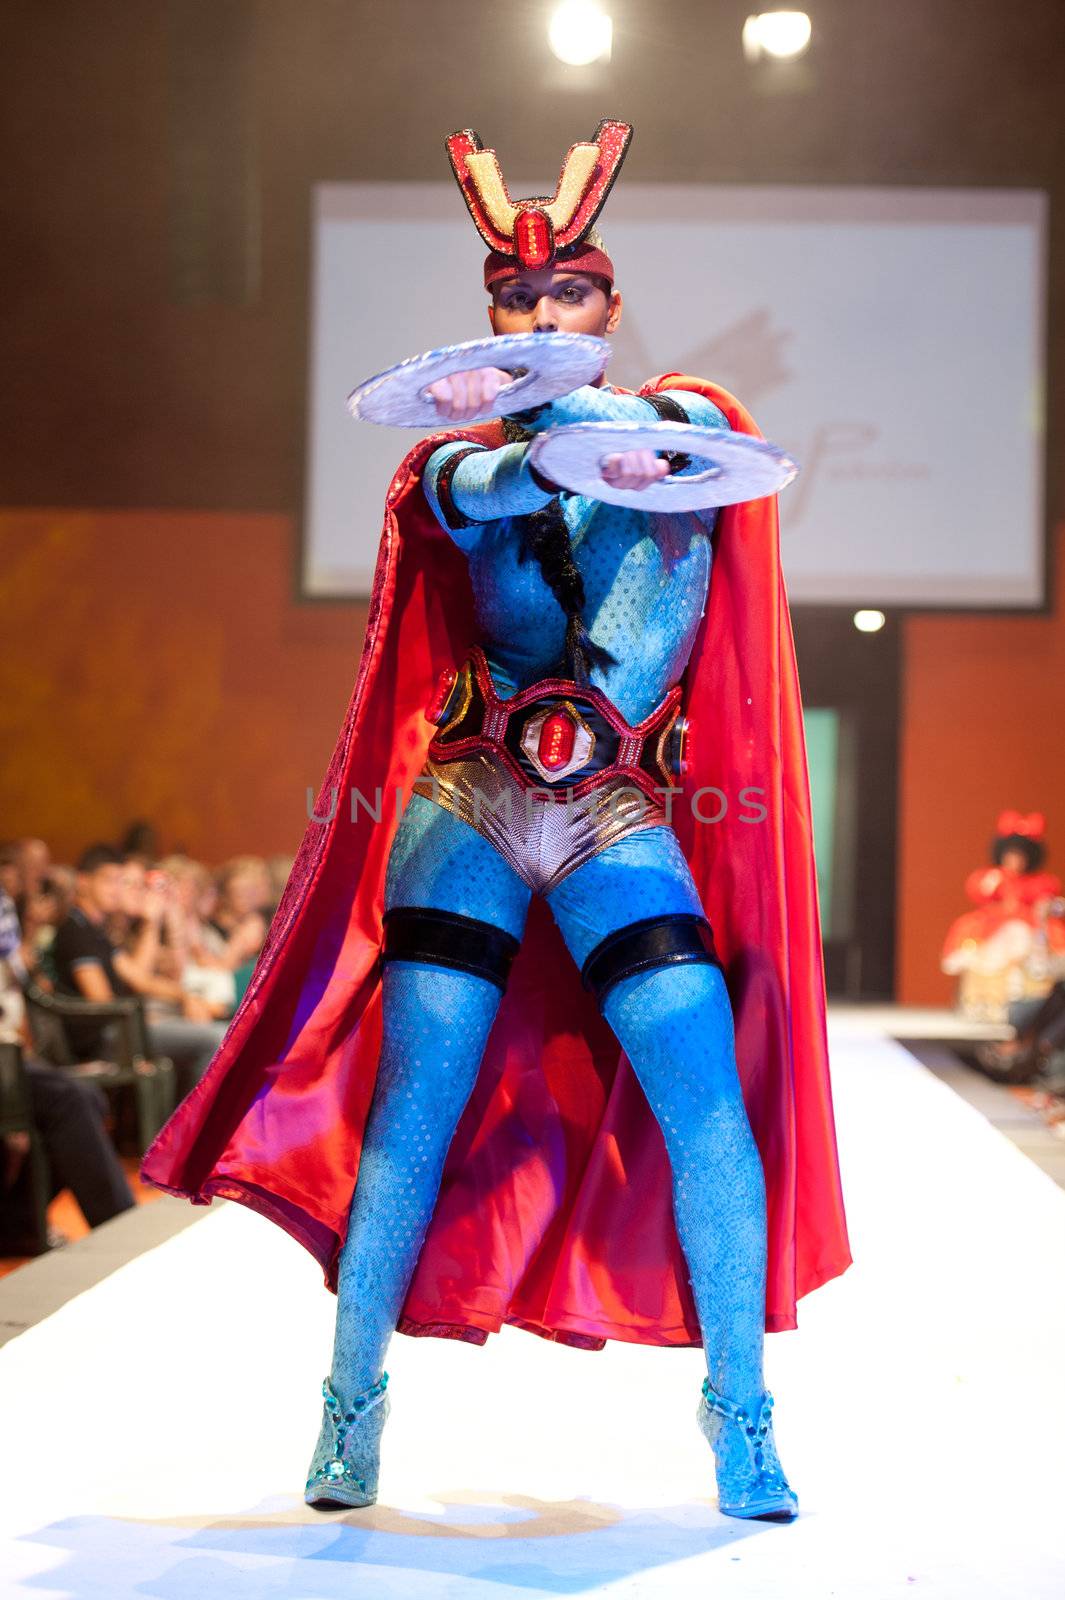 CANARY ISLANDS - 29 OCTOBER: Model on the catwalk wearing carnival costume from designer Mari Patron Dominguez during Carnival Fashion Week October 29, 2011 in Canary Islands, Spain